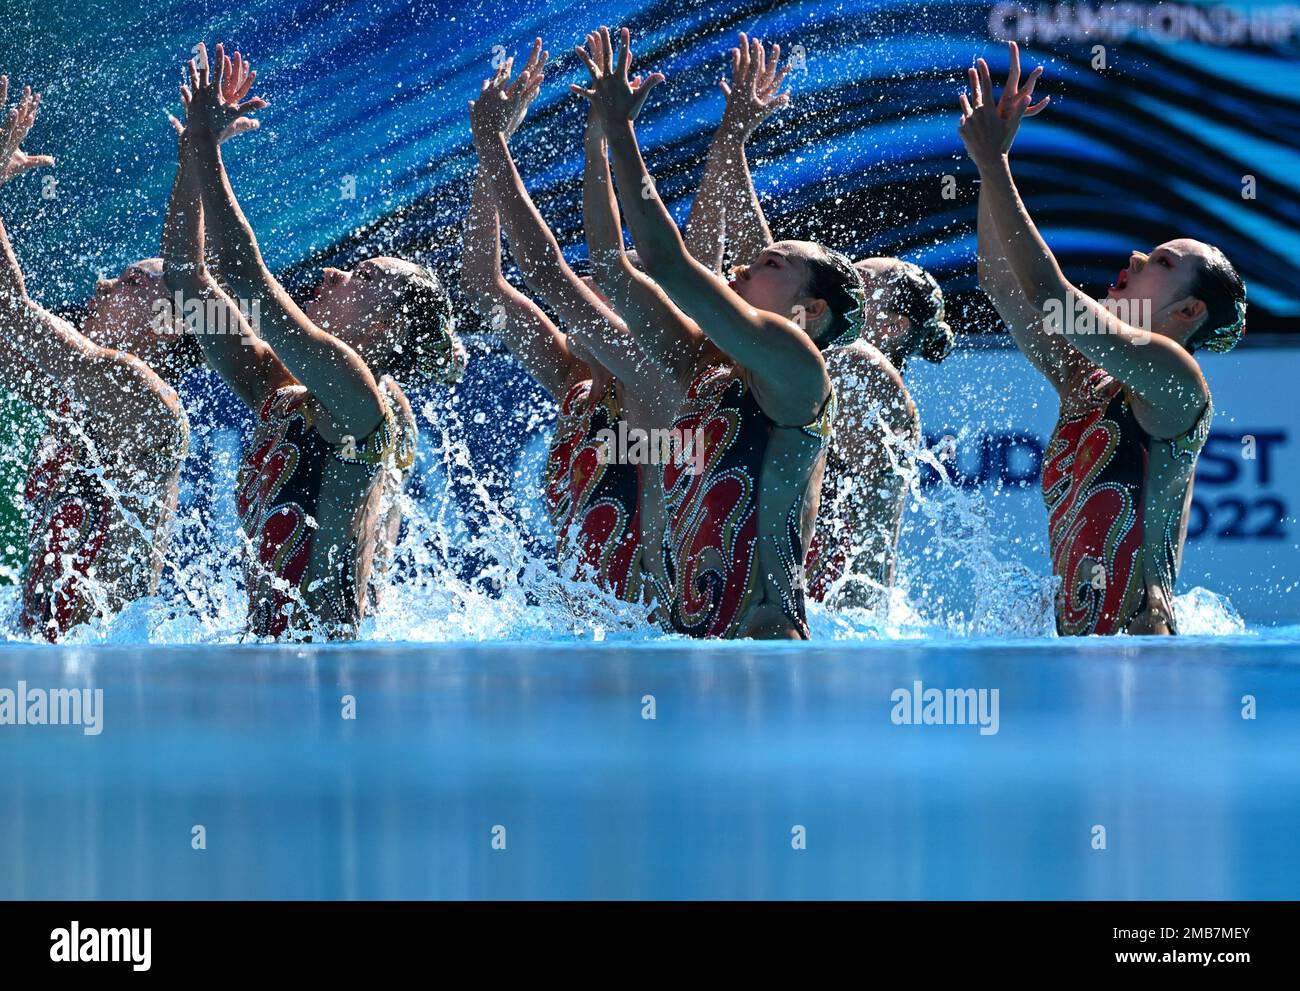 China team perform their routine in the artistic swimming team technical final at the 19th FINA World Championships in Budapest, Hungary, Tuesday, June 21, 2022